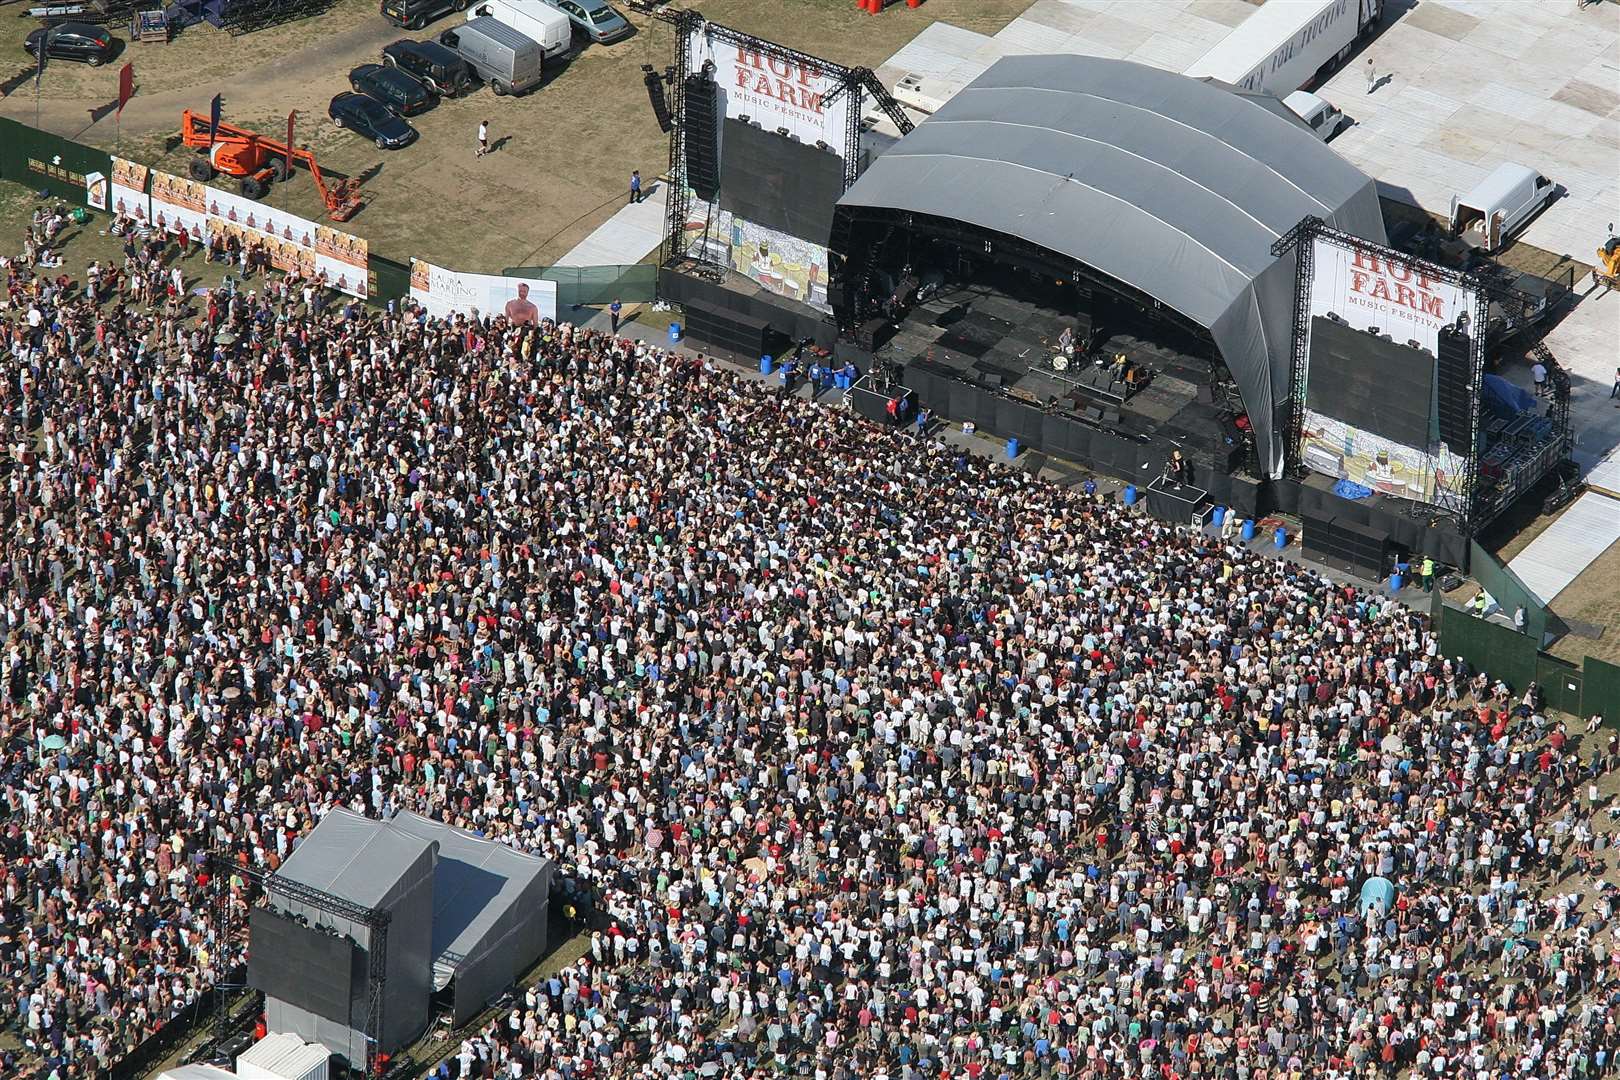 Thousands are expected to attend Saturday and Sunday's Tribute to Rock festival